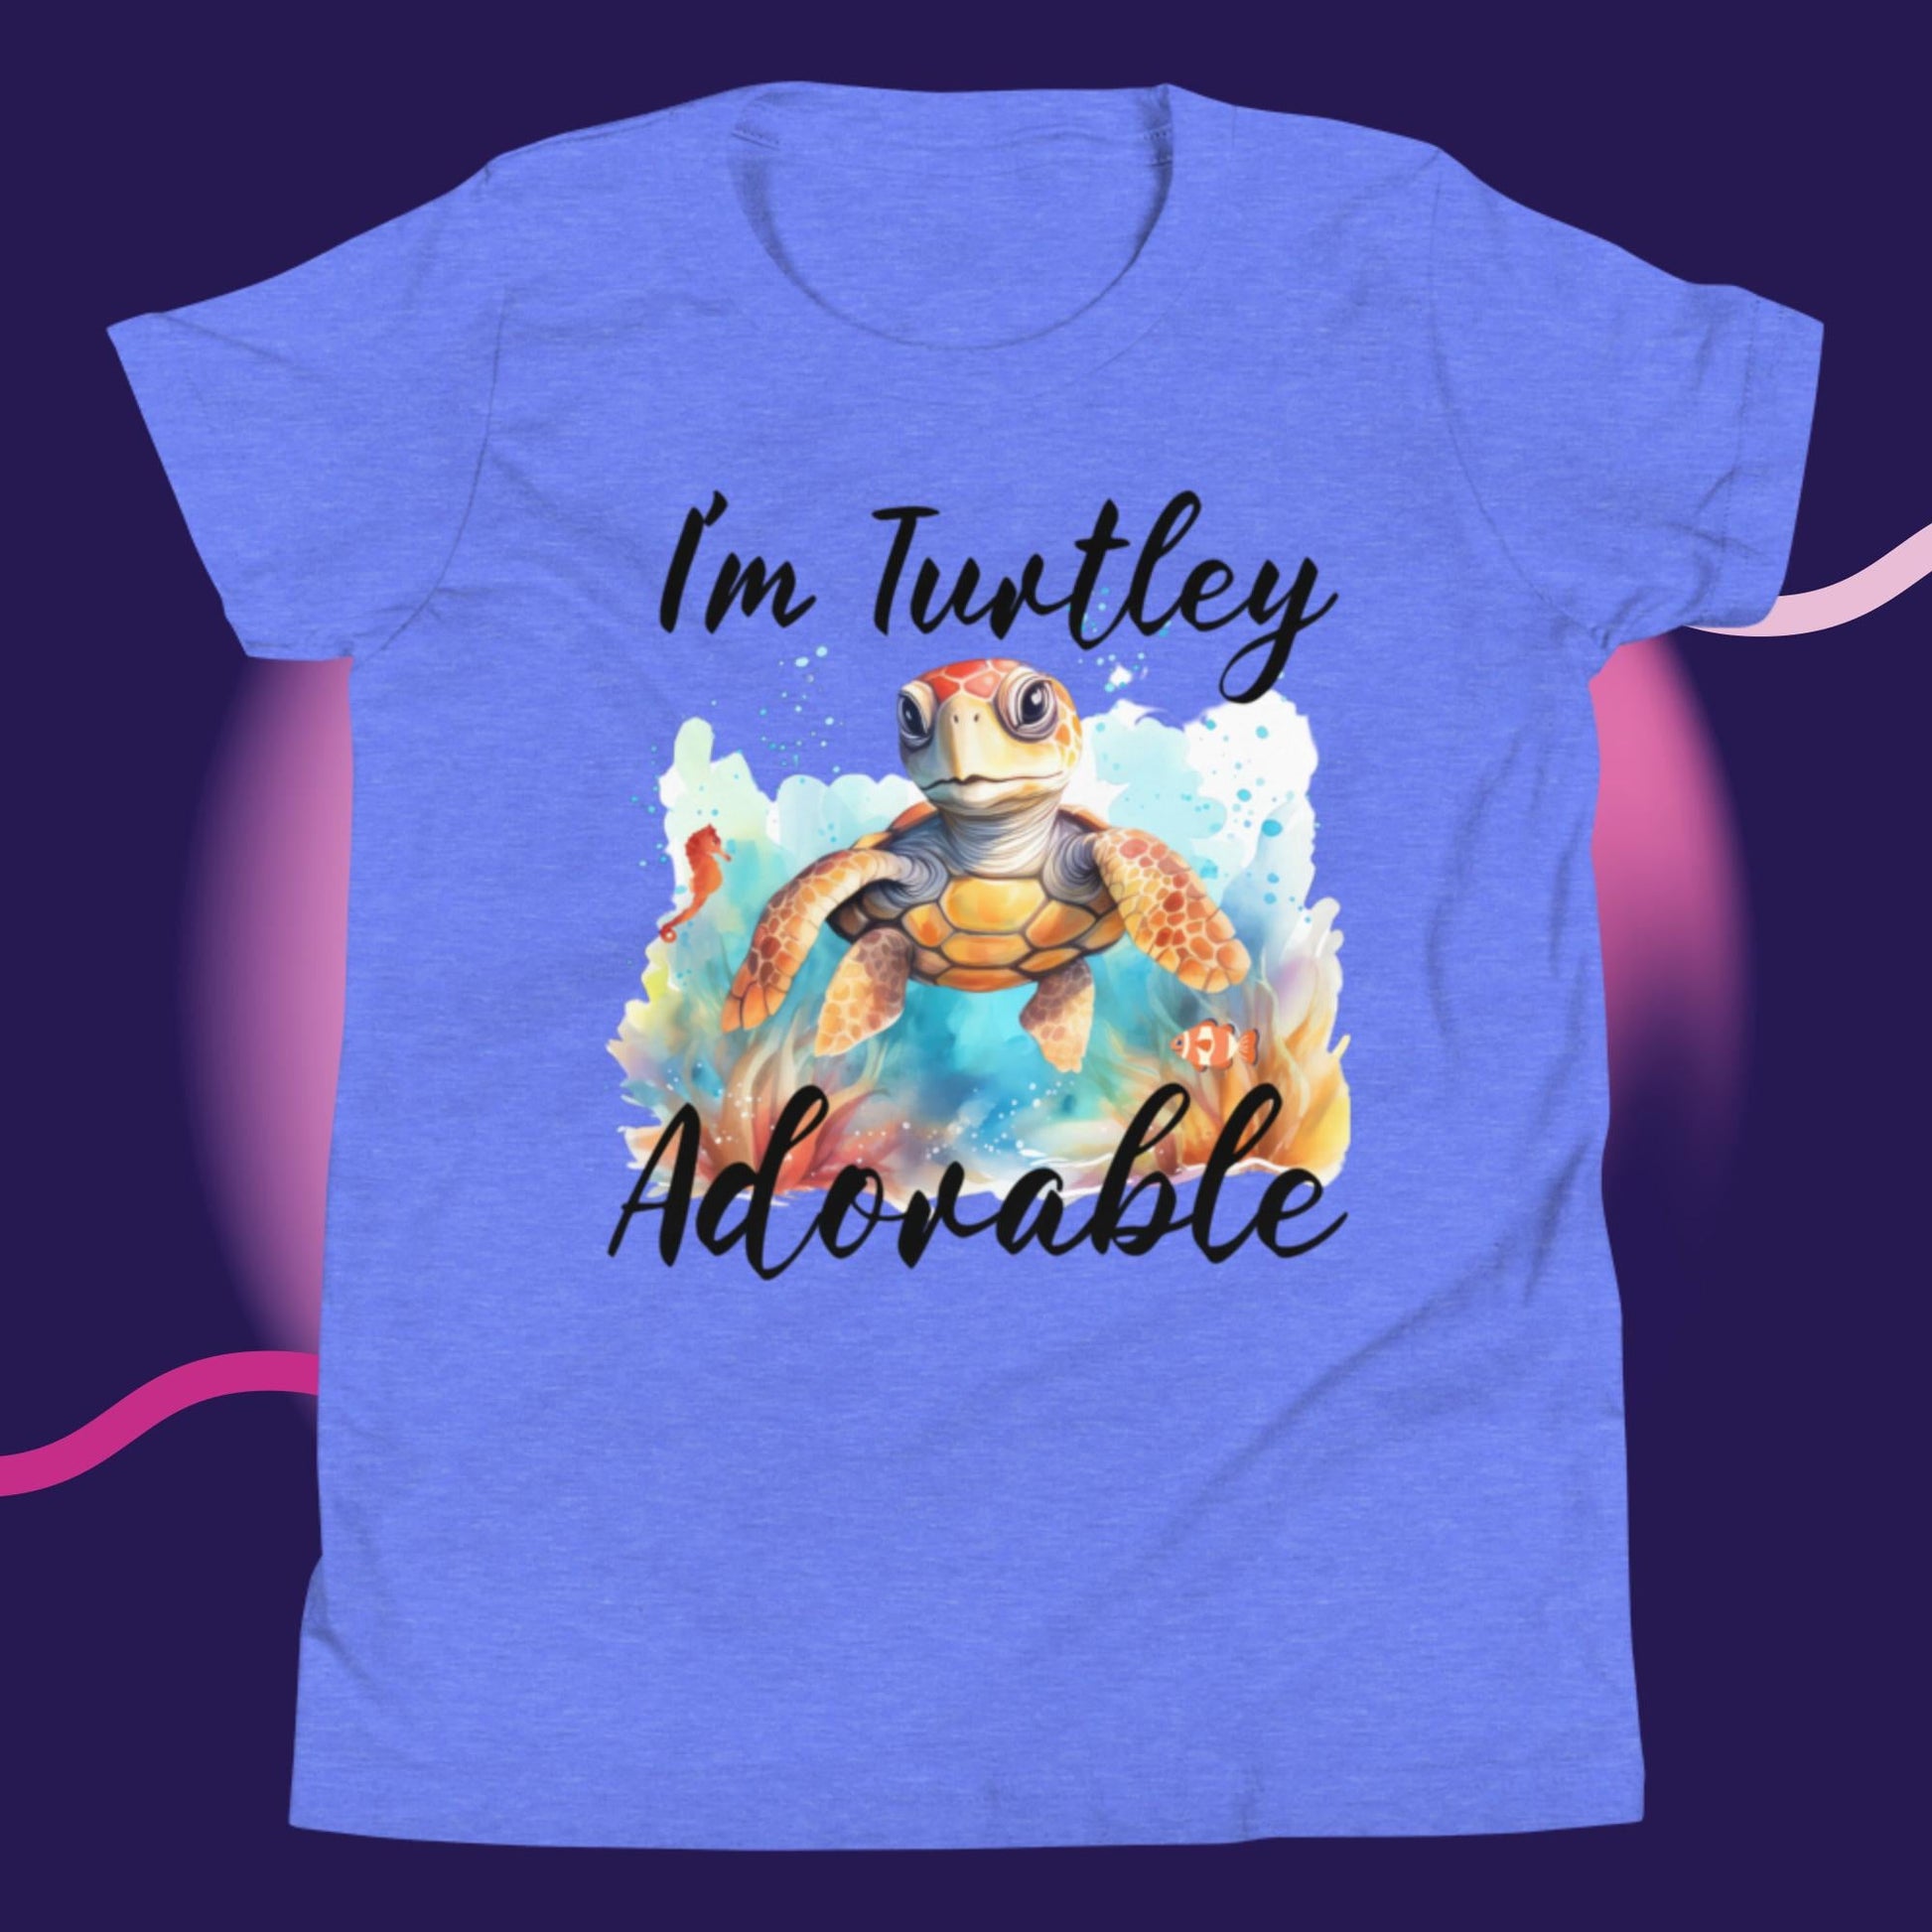 Turtley Adorable Kids Short Sleeve T-Shirt - Uniquely Included